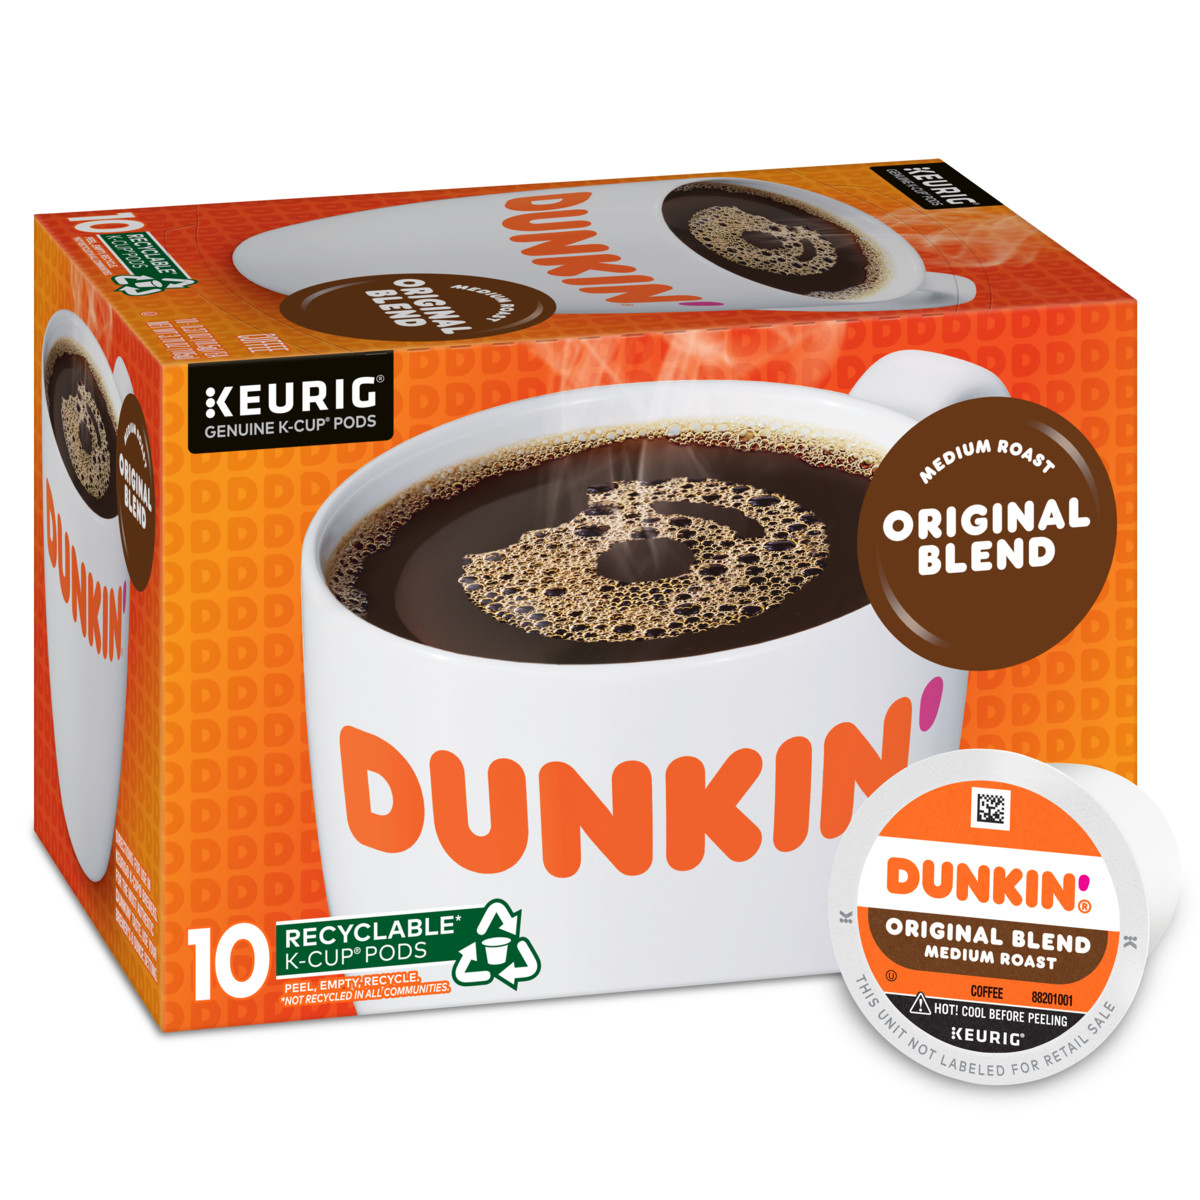 Dunkin'® Original Blend Medium Roast Coffee K-Cup® pods in an orange box with an image of a white mug filled with steaming coffee on it and a K-Cup® pod on its side in the foreground